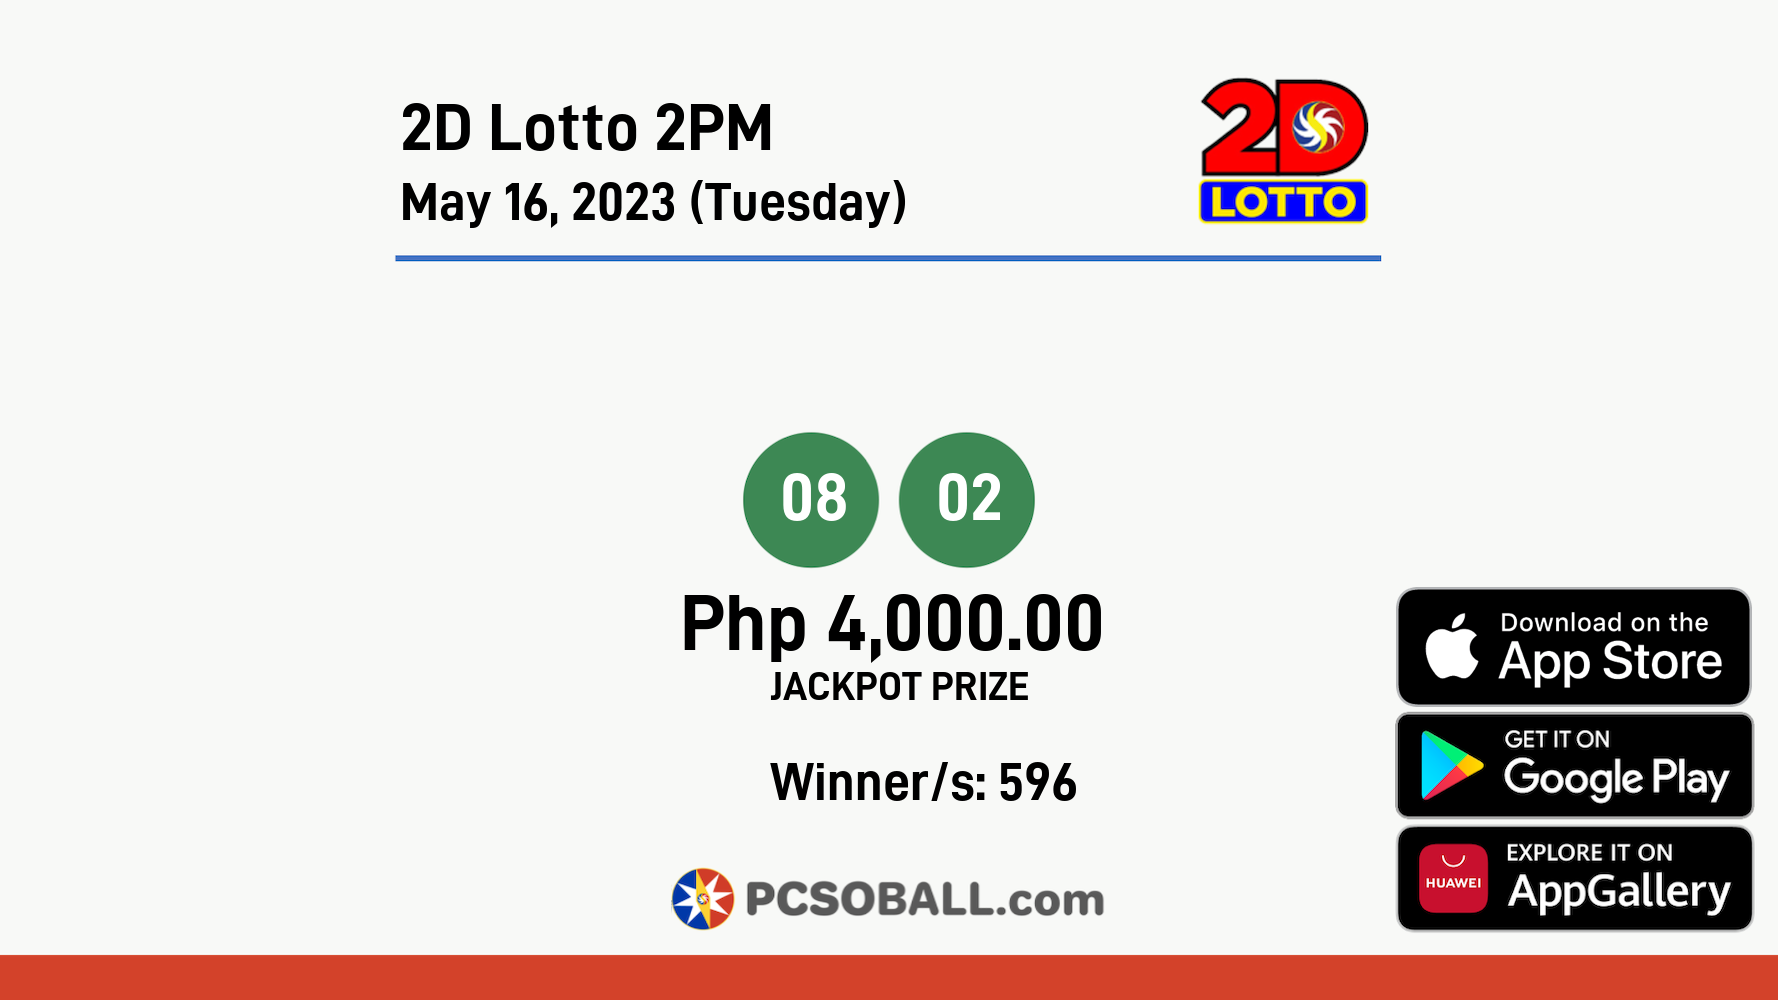 2D Lotto 2PM May 16, 2023 (Tuesday) Result